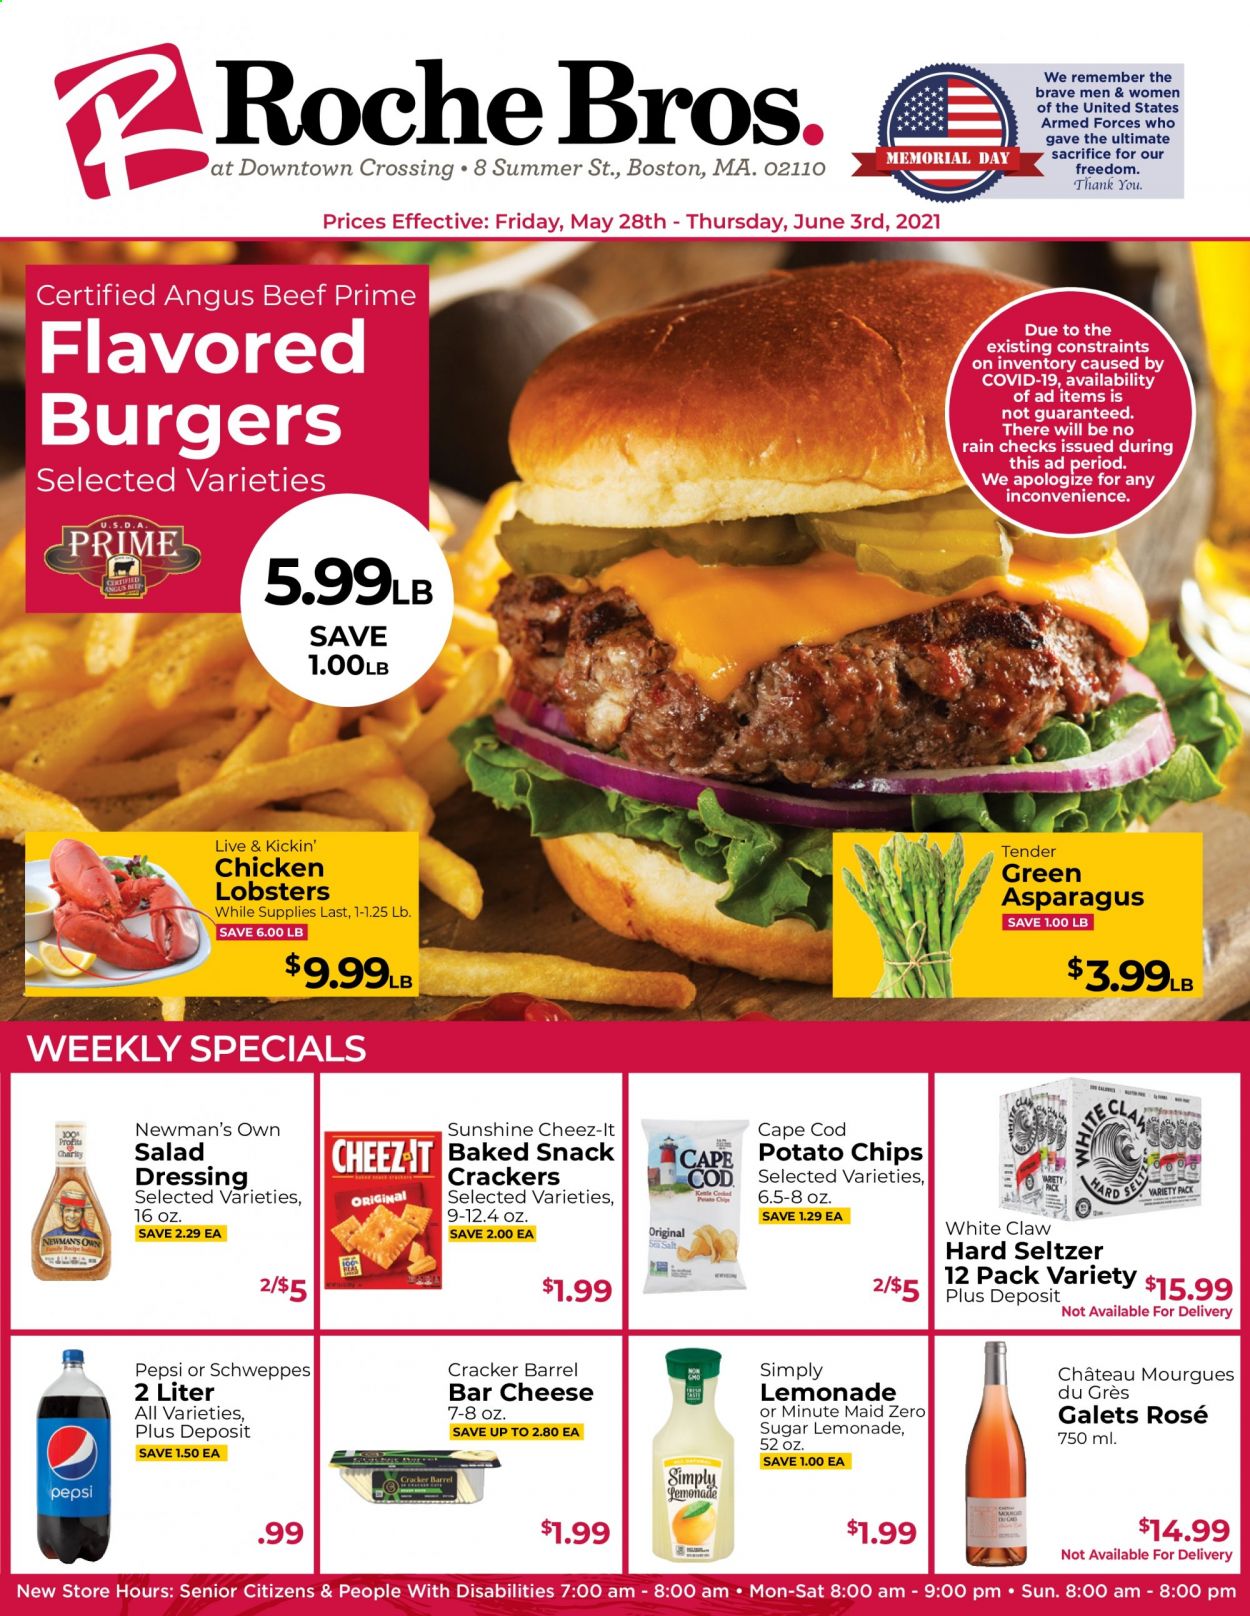 thumbnail - Roche Bros. Flyer - 05/28/2021 - 06/03/2021 - Sales products - cake, cupcake, asparagus, carrots, onion, blueberries, cherries, cod, lobster, swordfish, seafood, nuggets, hamburger, chicken nuggets, pulled pork, bacon, ham, guacamole, potato salad, mozzarella, swiss cheese, Galbani, Sunshine, dip, chocolate, snack, crackers, biscuit, potato chips, cheddar biscuits, Cheez-It, rice, salad dressing, dressing, Schweppes, Pepsi, fruit punch, wine, rosé wine, bourbon, White Claw, Hard Seltzer, ground turkey, chicken thighs, beef meat, steak, pork meat, bouquet, rose. Page 1.